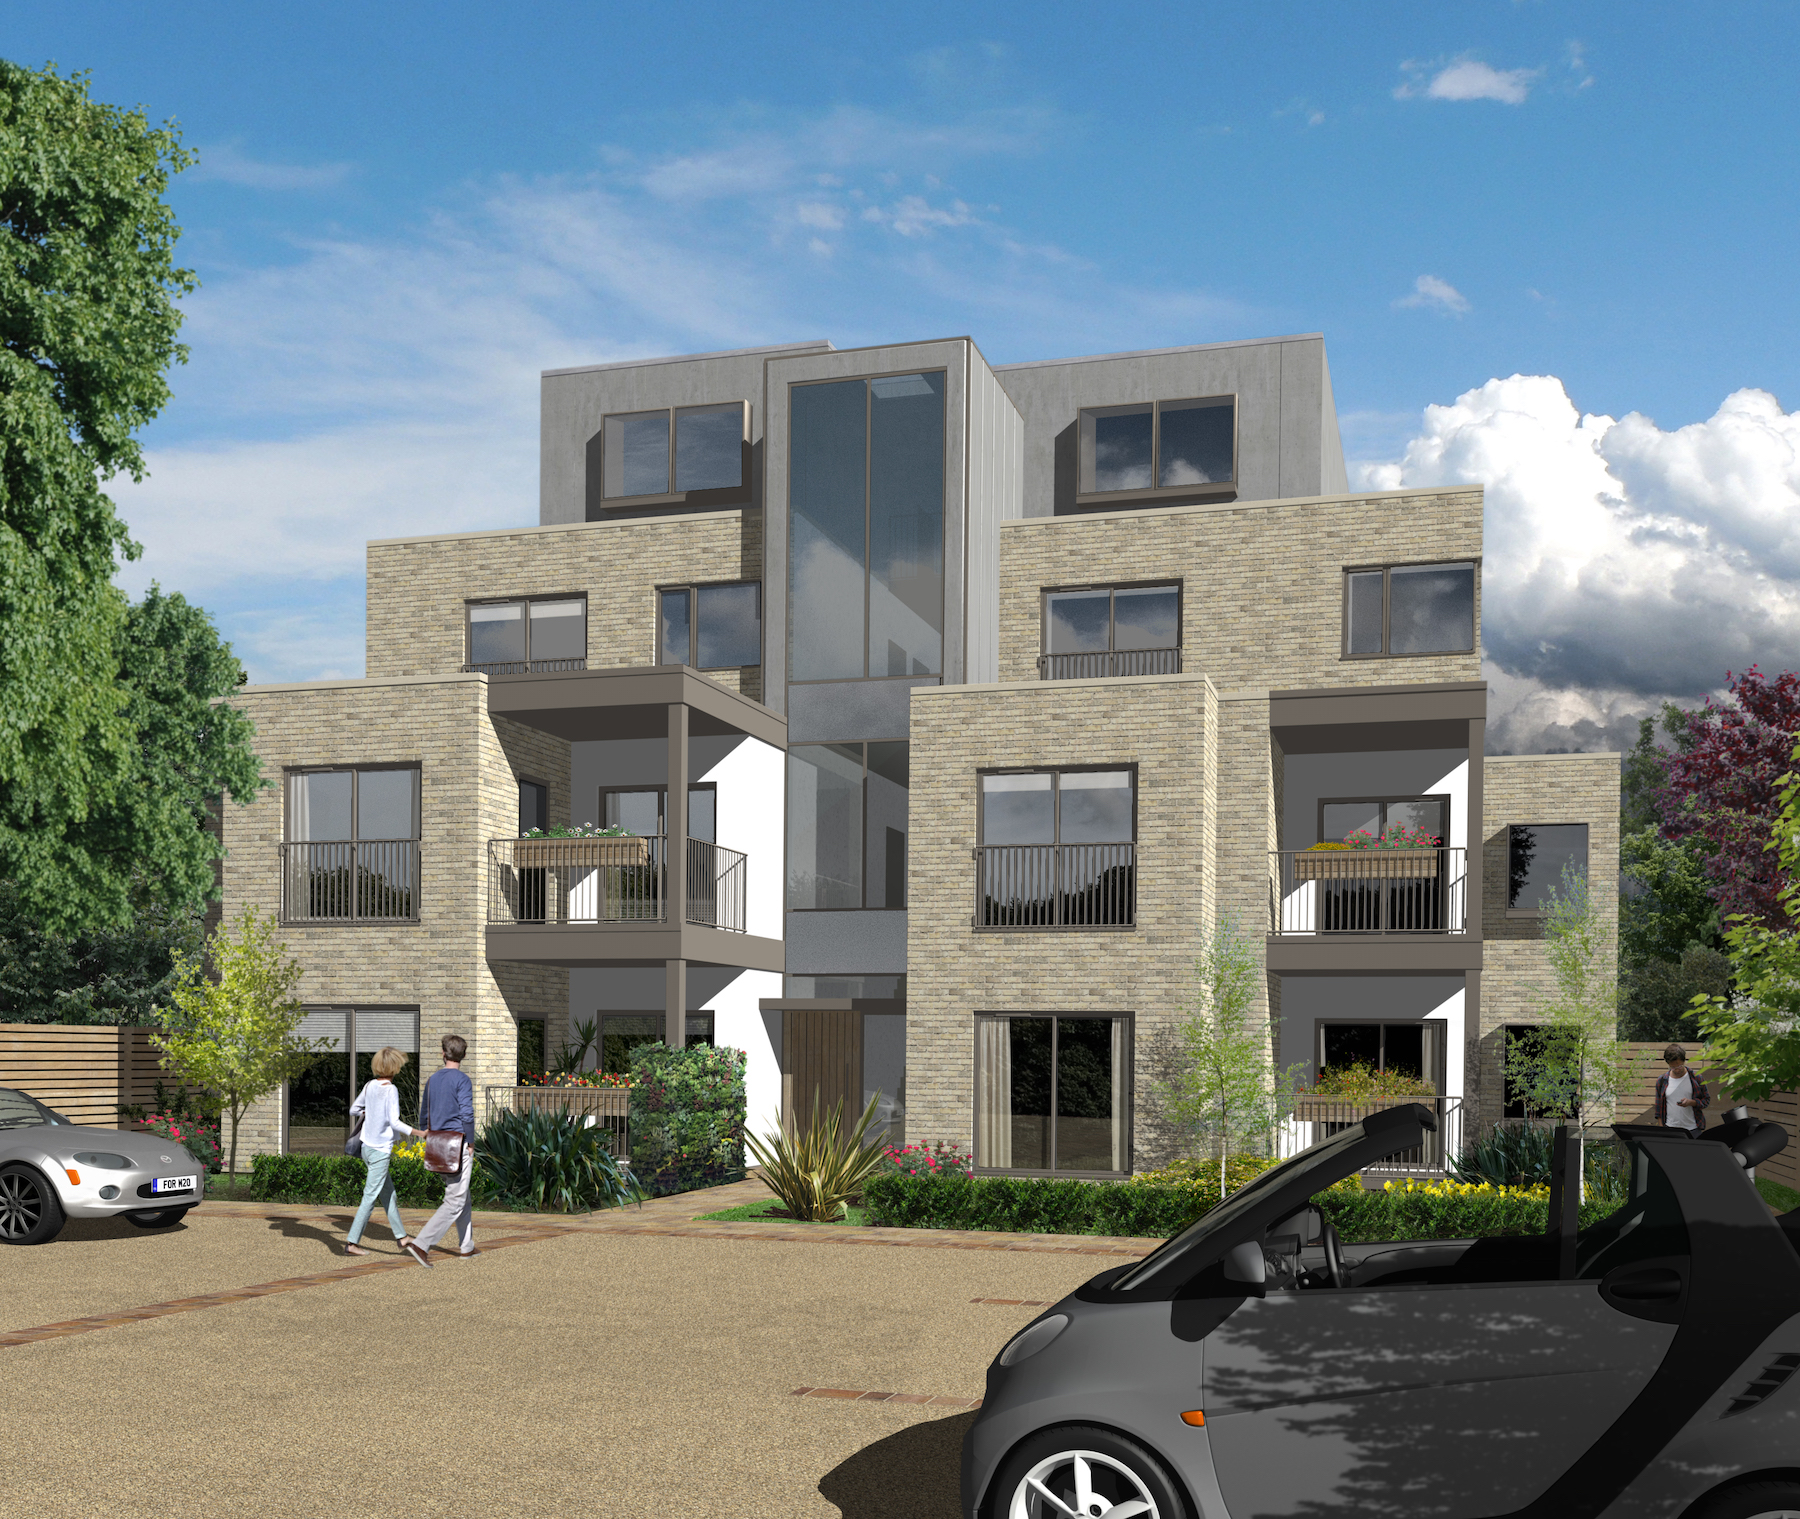 9 Highly contemporary 2/3 bedroom homes, Foxley Lane, Purley